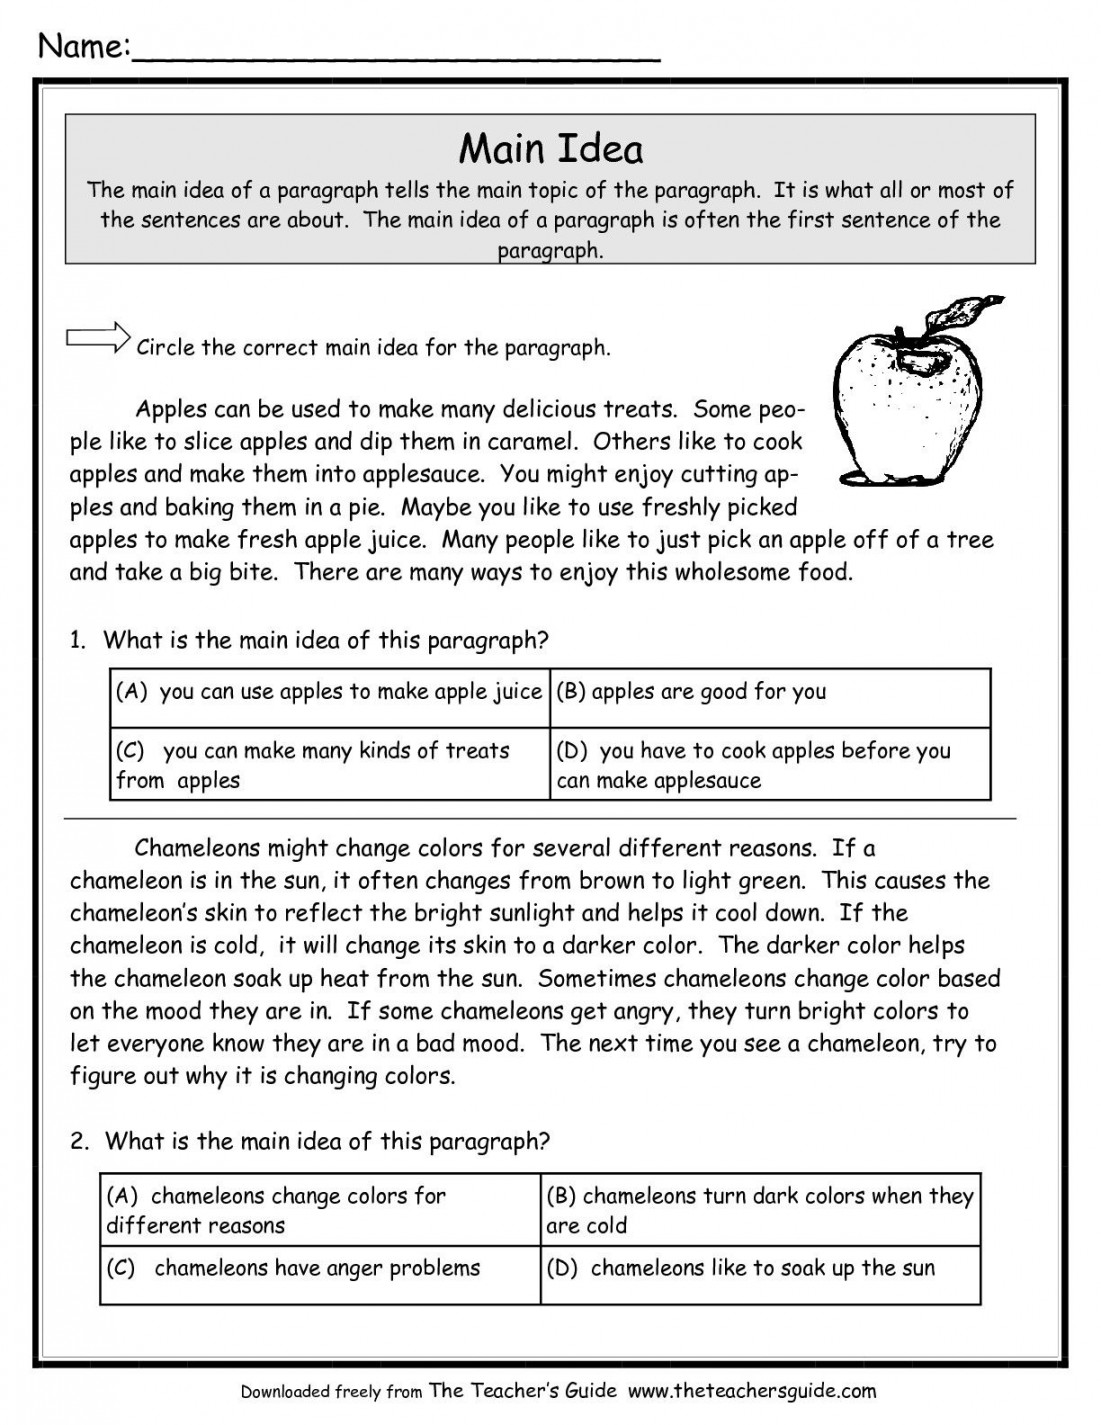 Main Idea Worksheets from The Teacher